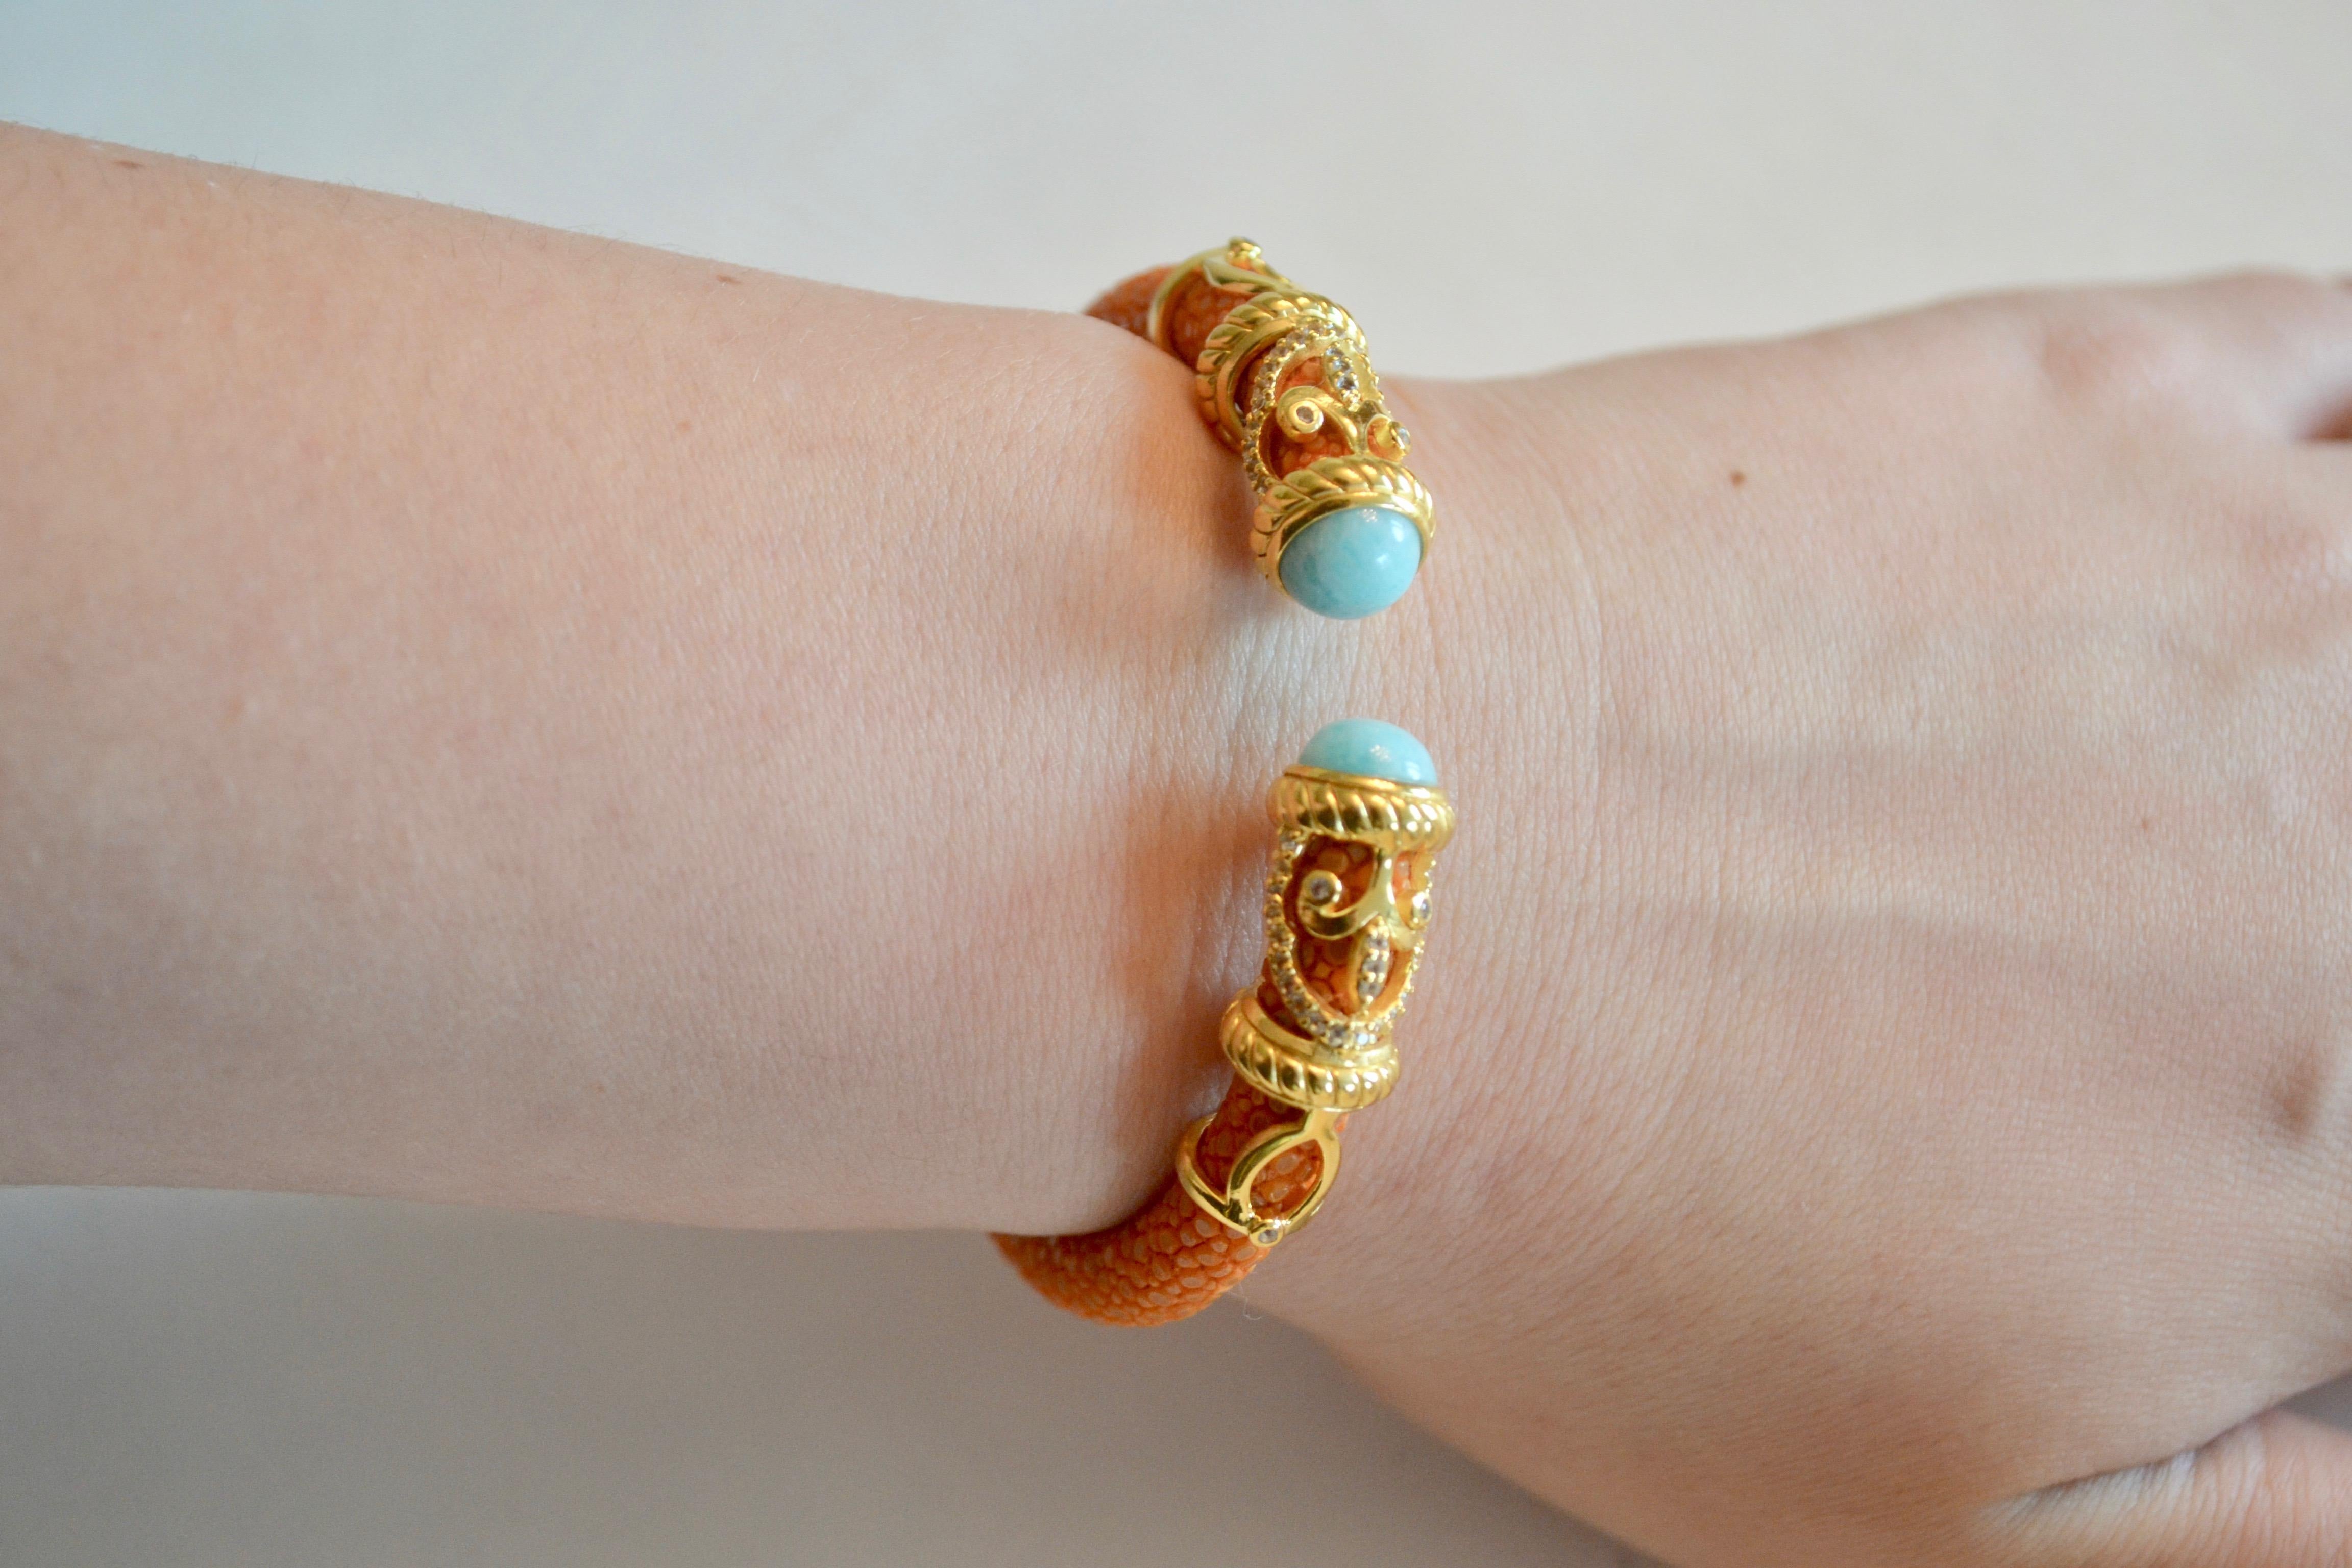 Coral stingray bracelet with Amazonite stones and gold plate scroll detailing from Cristina Sabatini. 